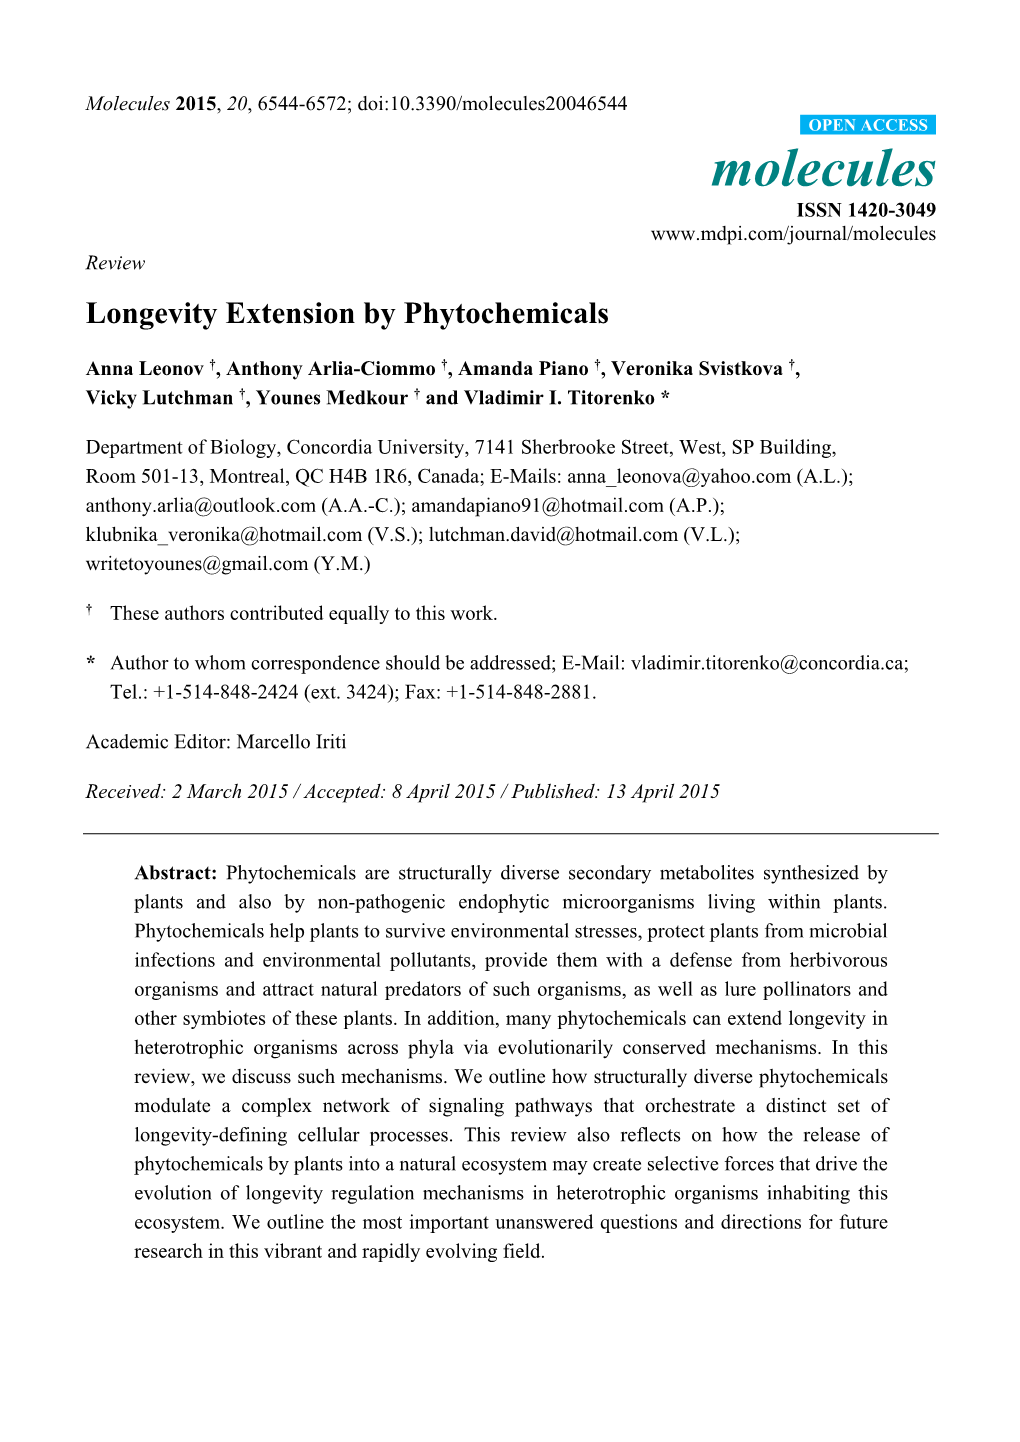 Longevity Extension by Phytochemicals